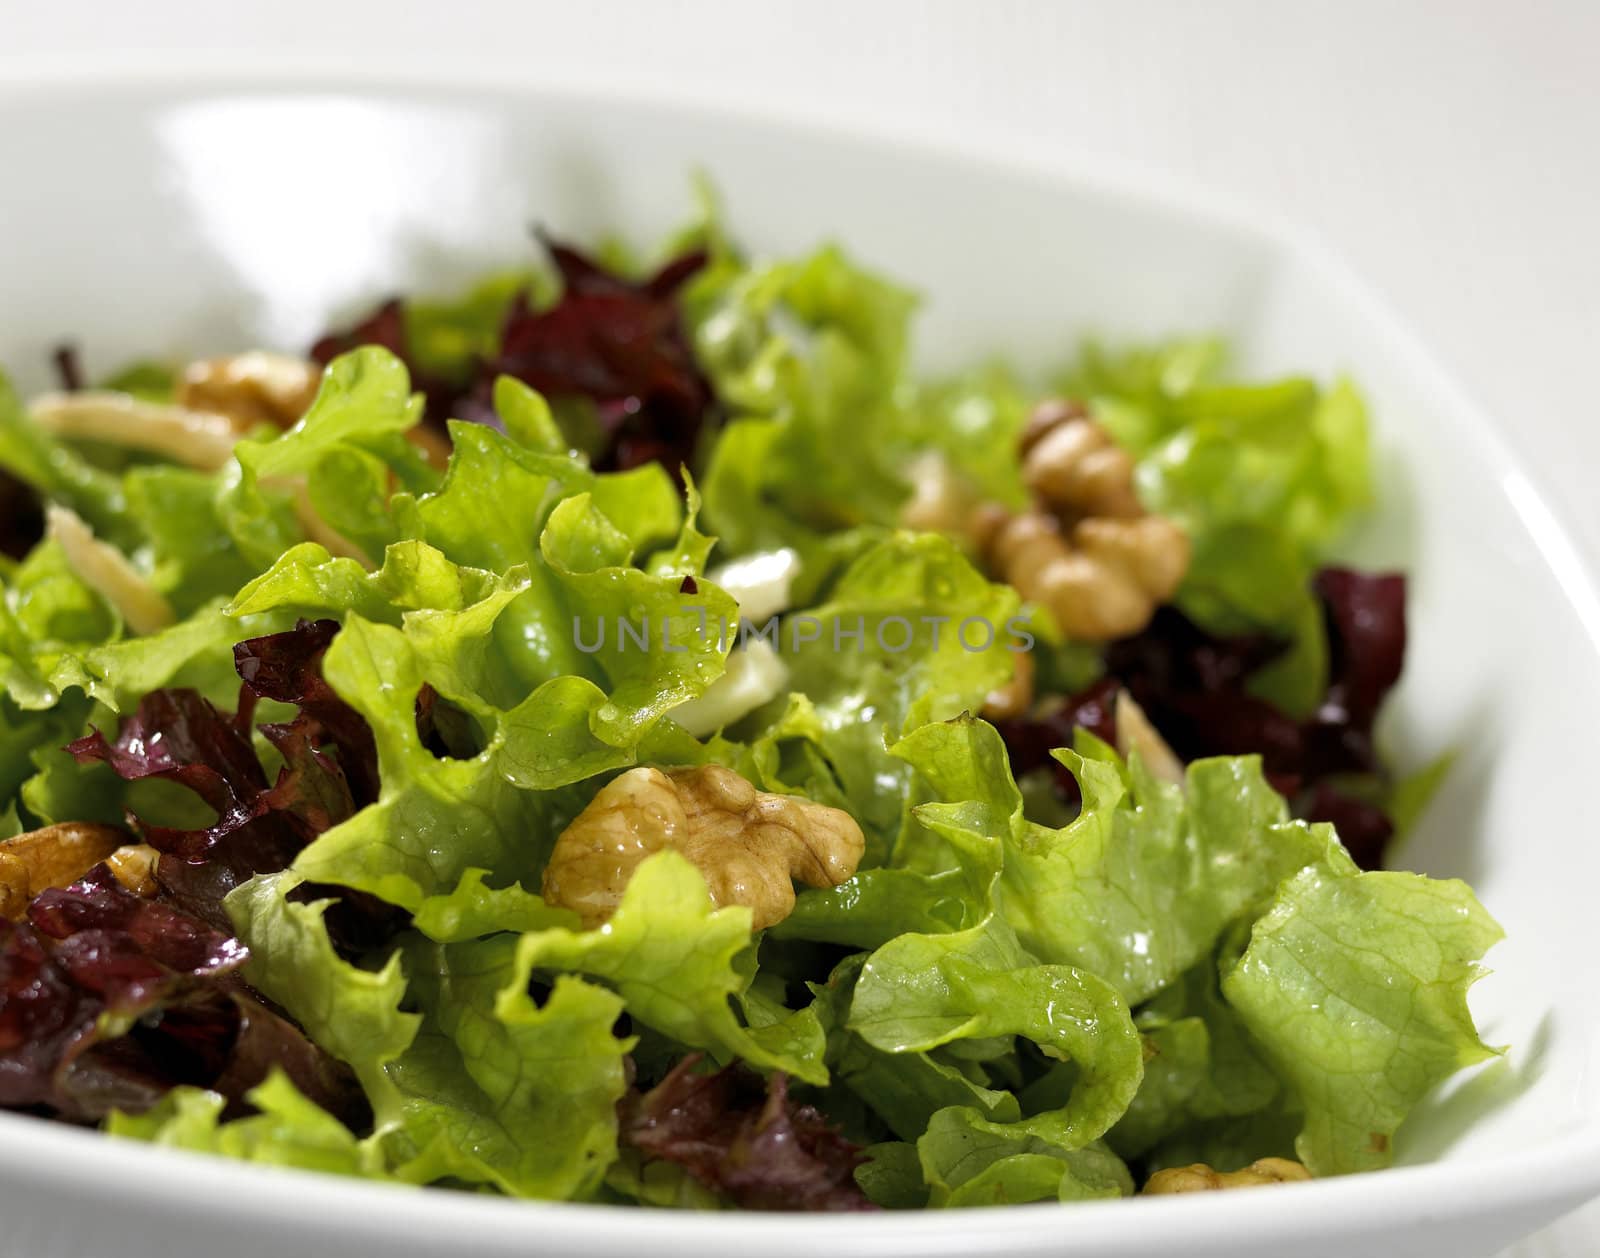 roman trevisan nuts salad ready for eat